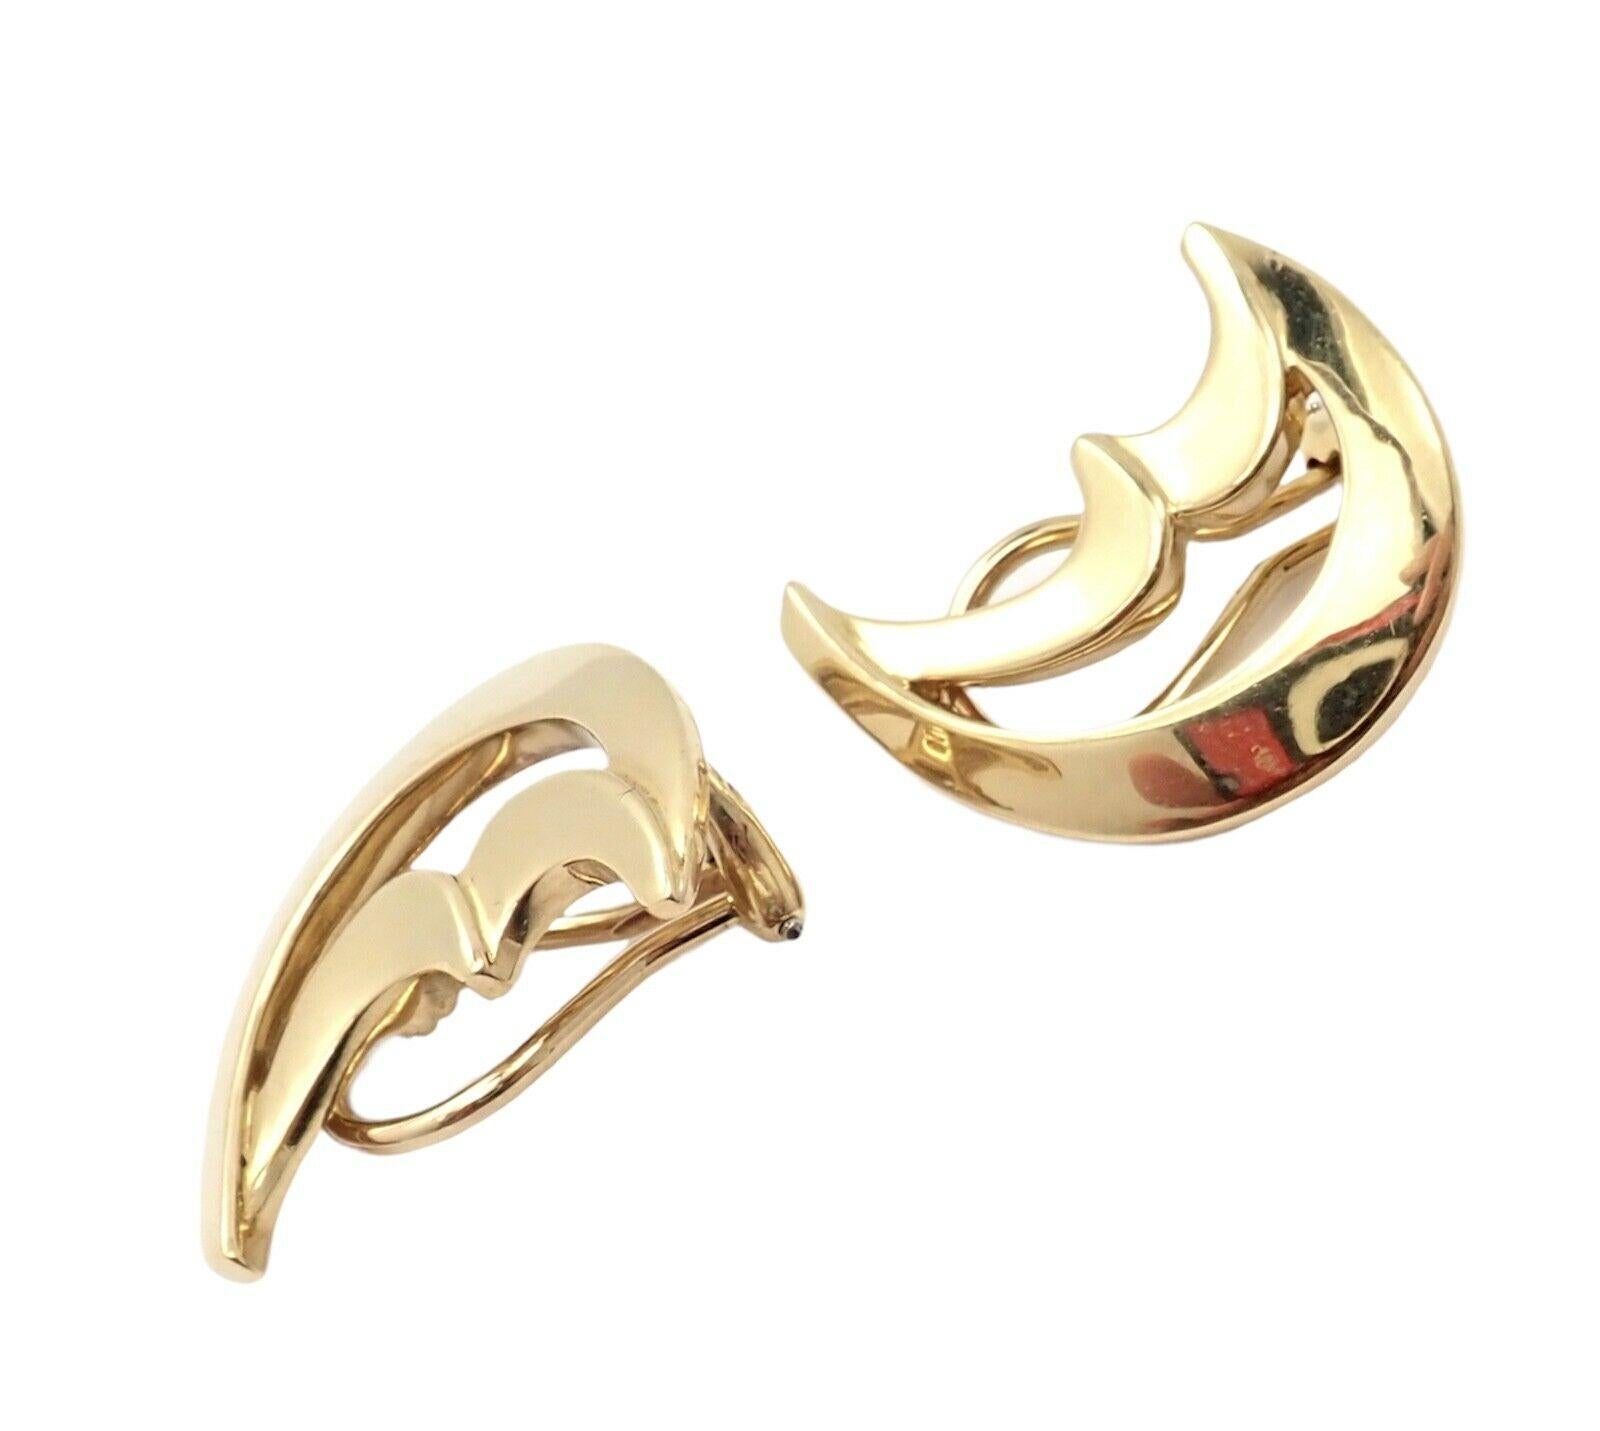 18k Yellow Gold Vintage Crescent Moon Large Earrings by Paloma Picasso made for Tiffany & Co.
These earrings were made for non  pierced ears, but they can be converted for pierced by adding posts.
Details:
Measurements: 22mm x 18mm
Weight: 12.2